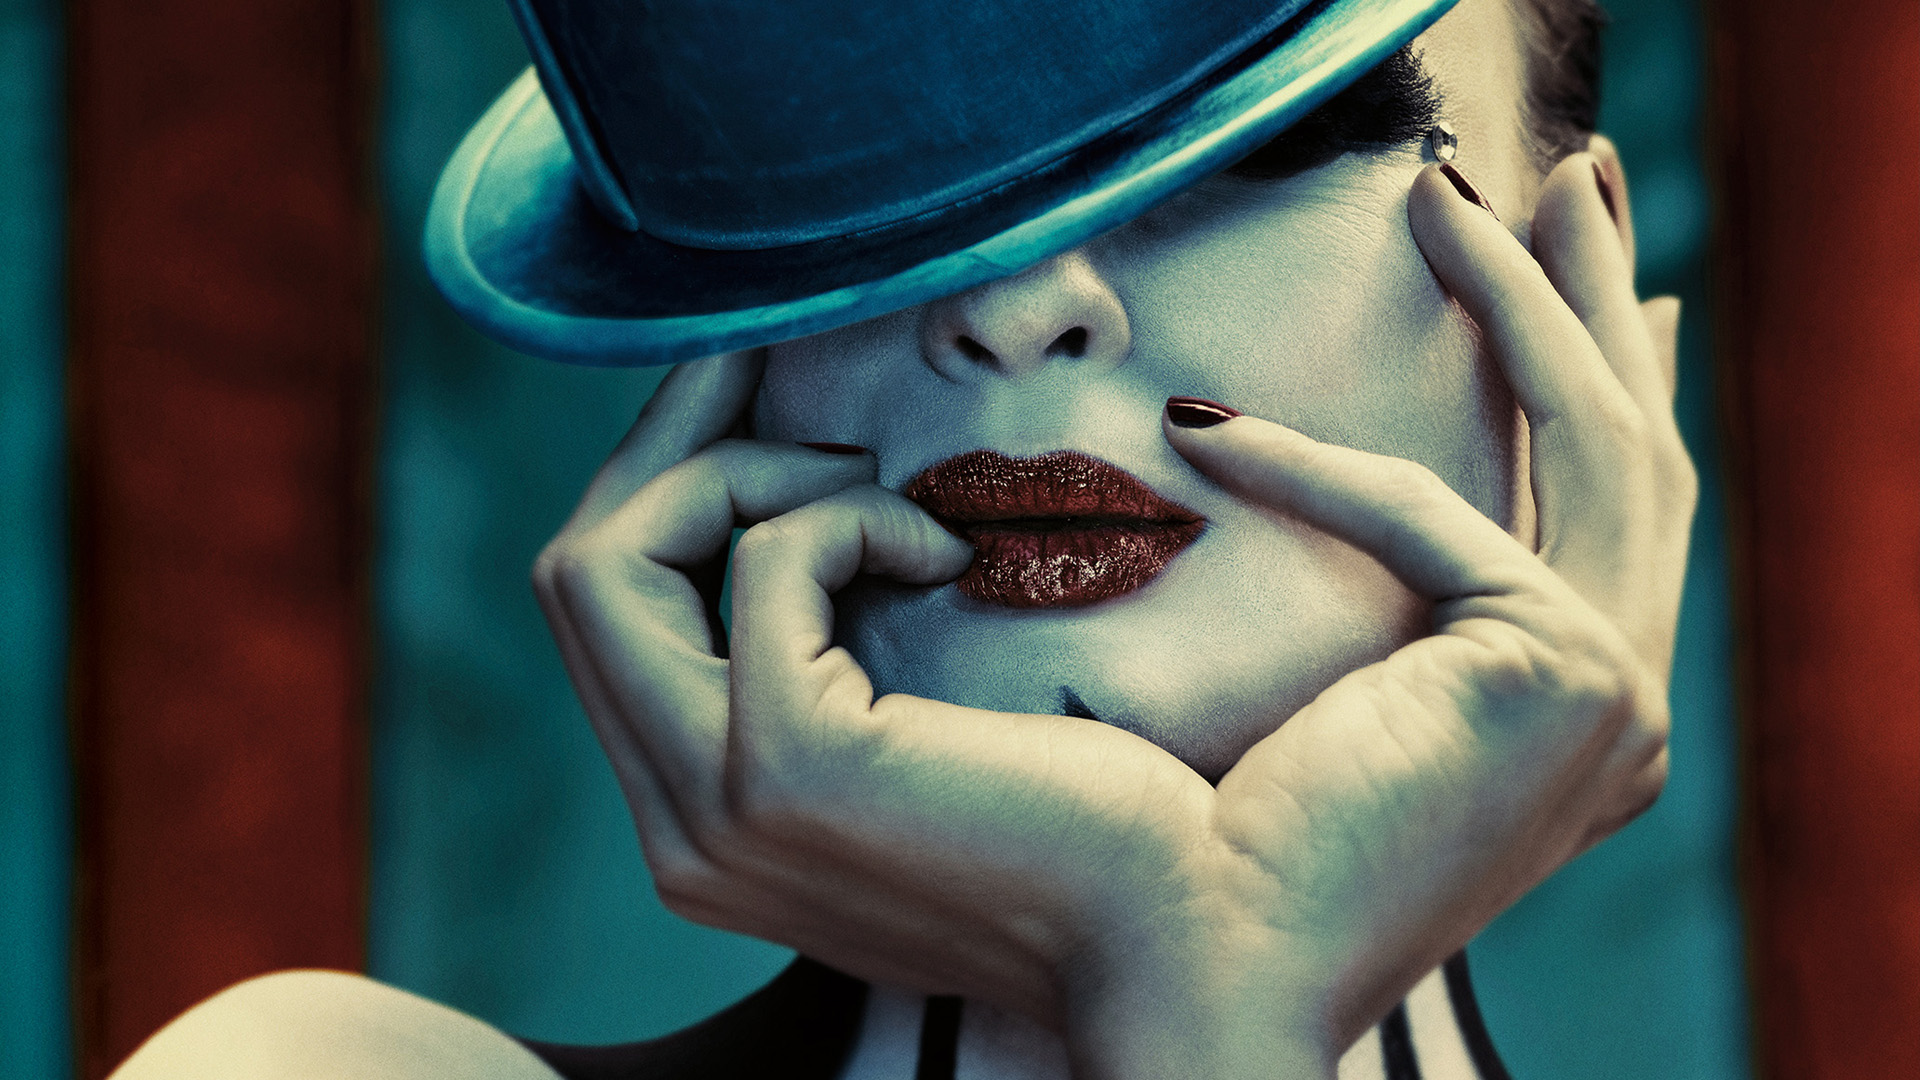 Women Model Face American Horror Story TV Top Hat Finger On Lips Red Lipstick Painted Nails 1920x1080